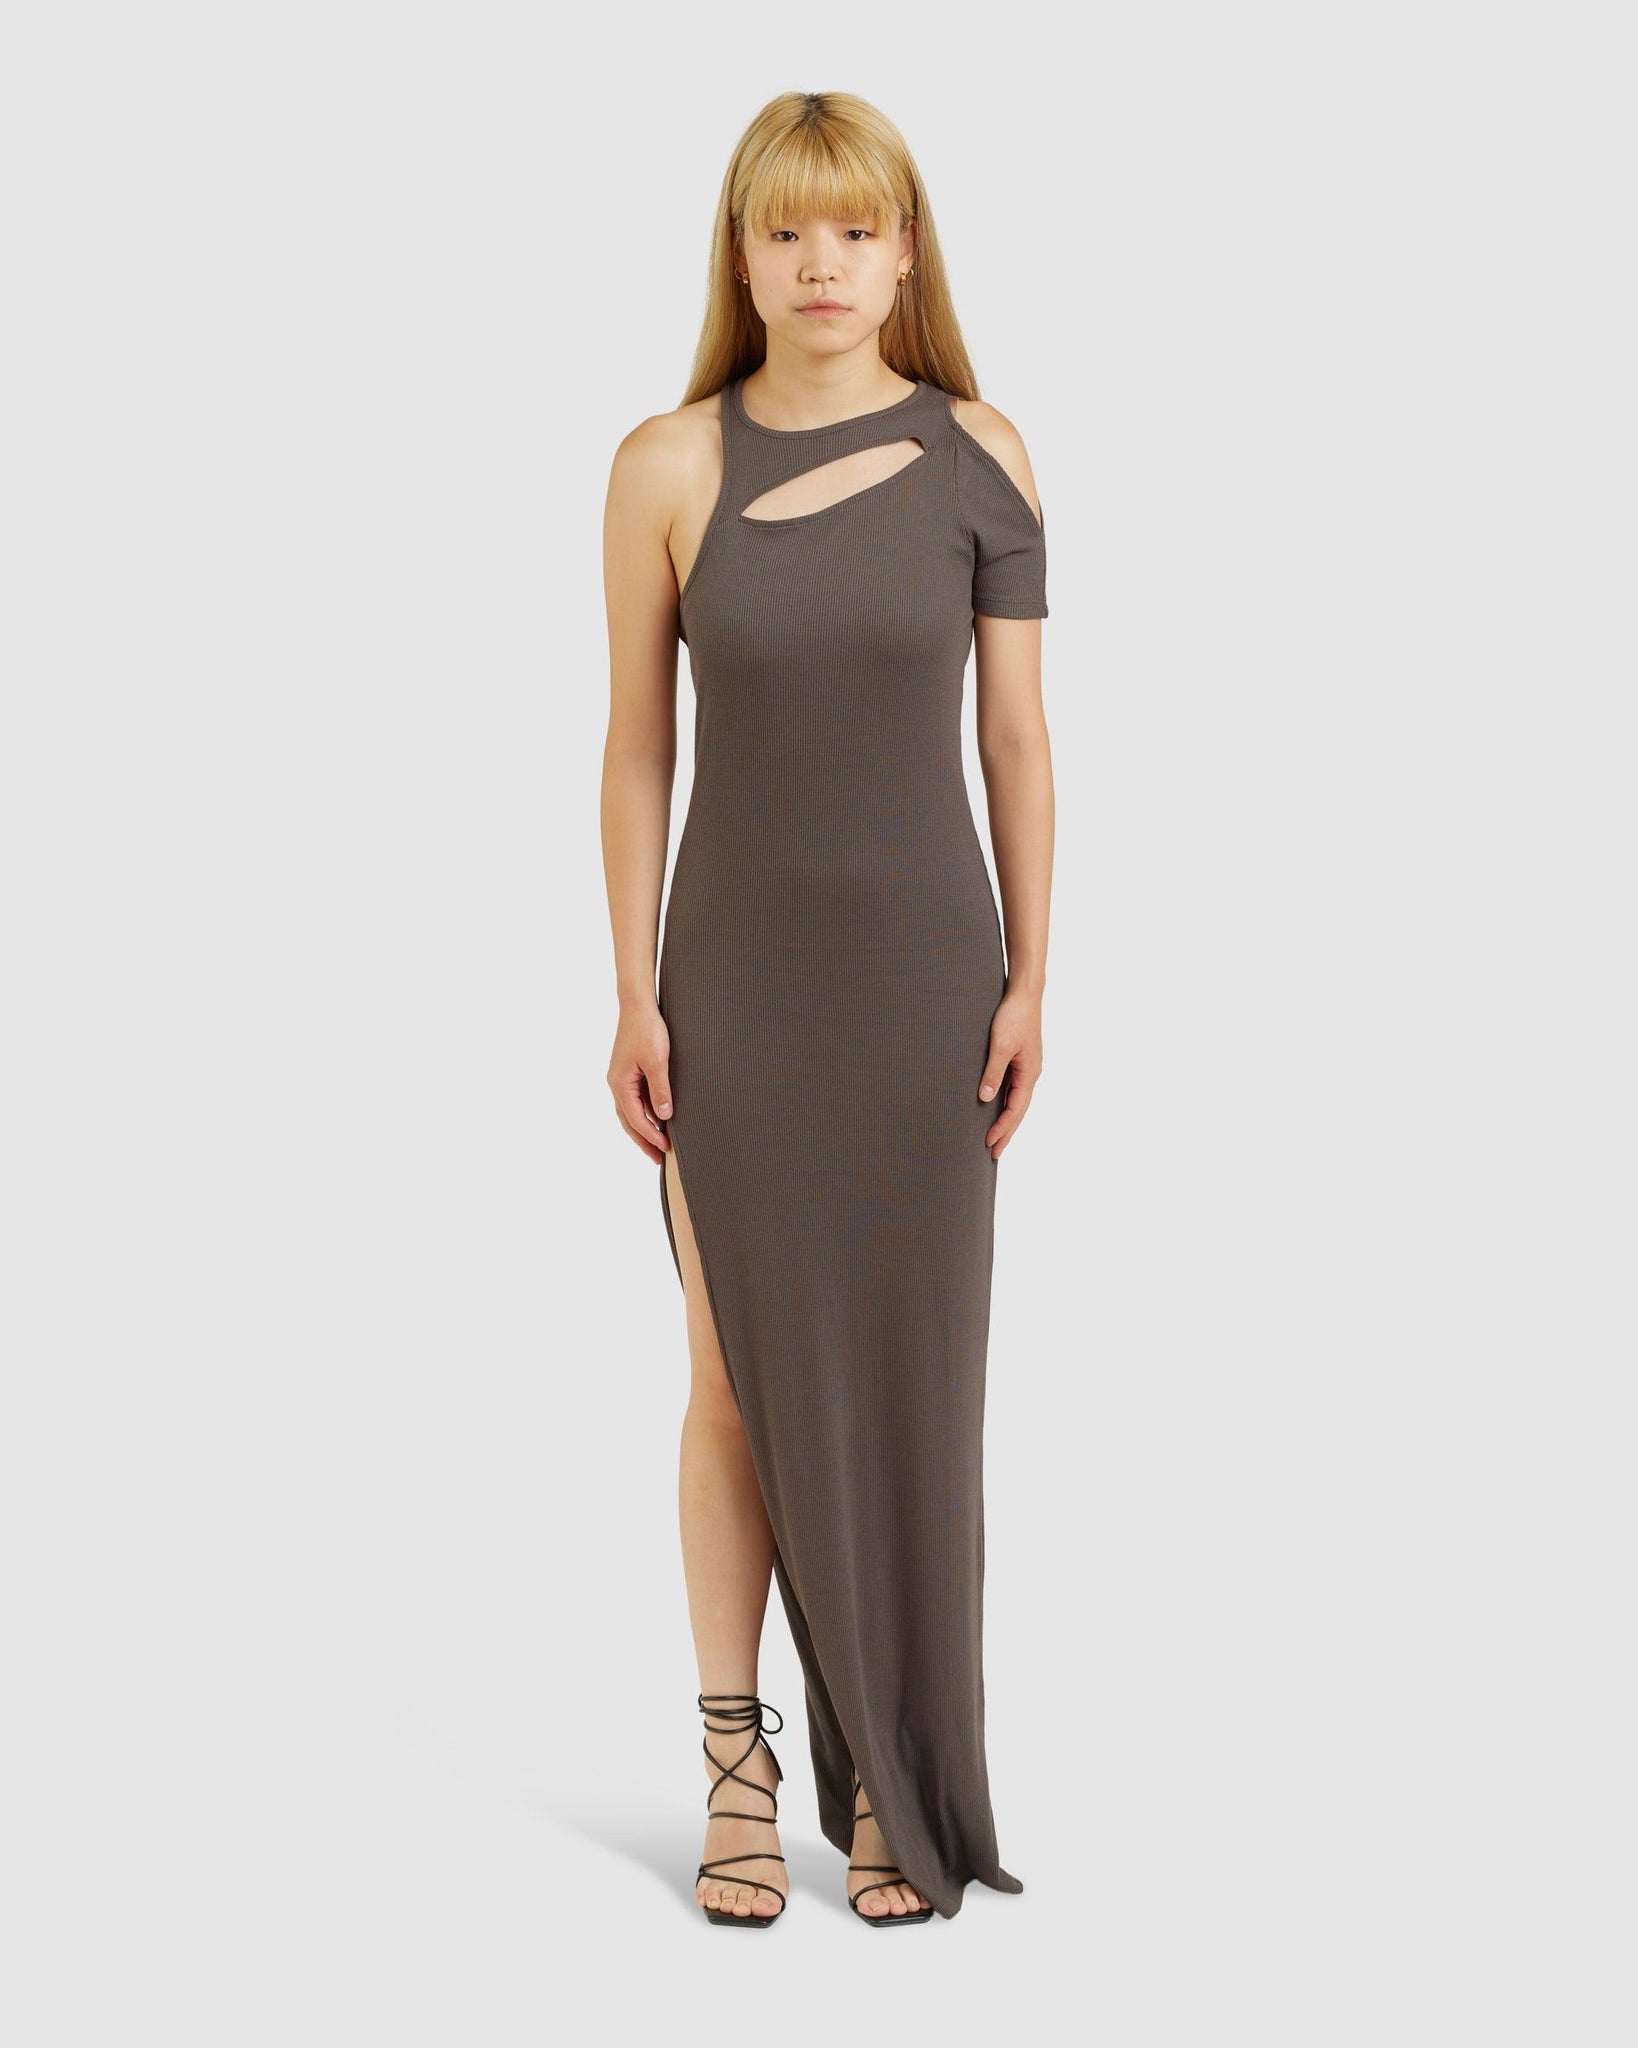 Slit Dress - {{ collection.title }} - Chinatown Country Club 